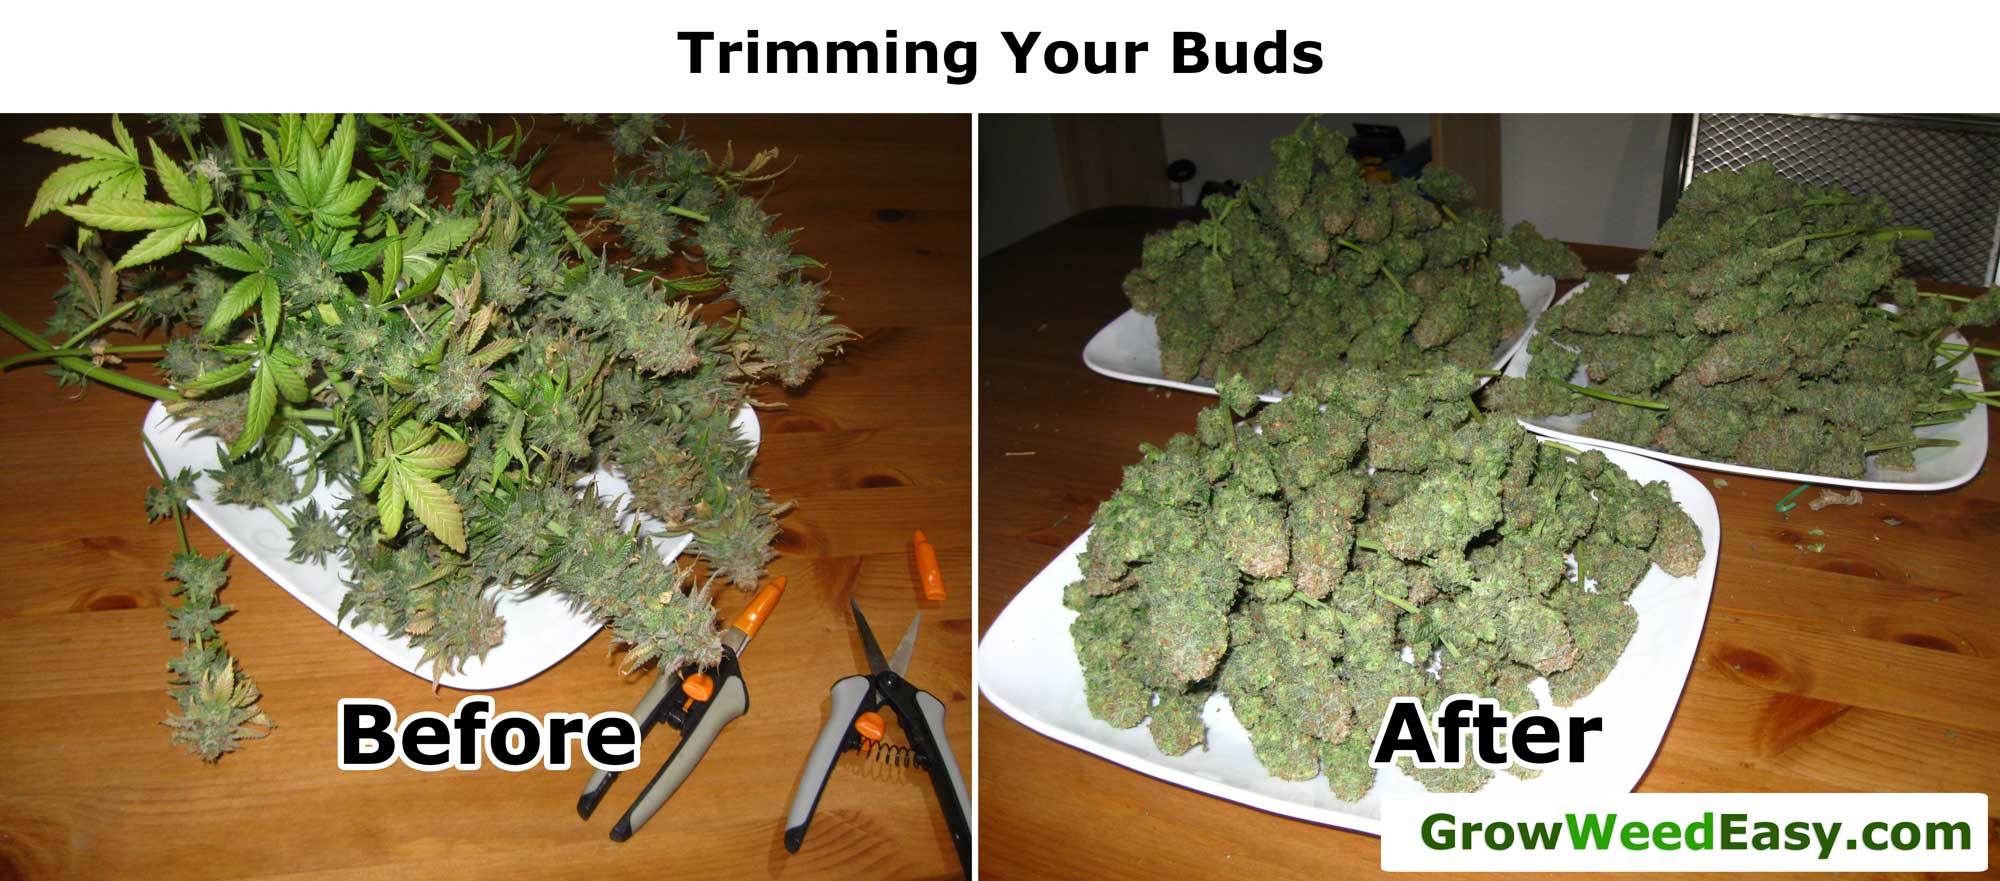 buds marijuana drying cannabis trim before curing leaves trimming cure grow weed dry much growweedeasy cut temperature leafy harvested growing